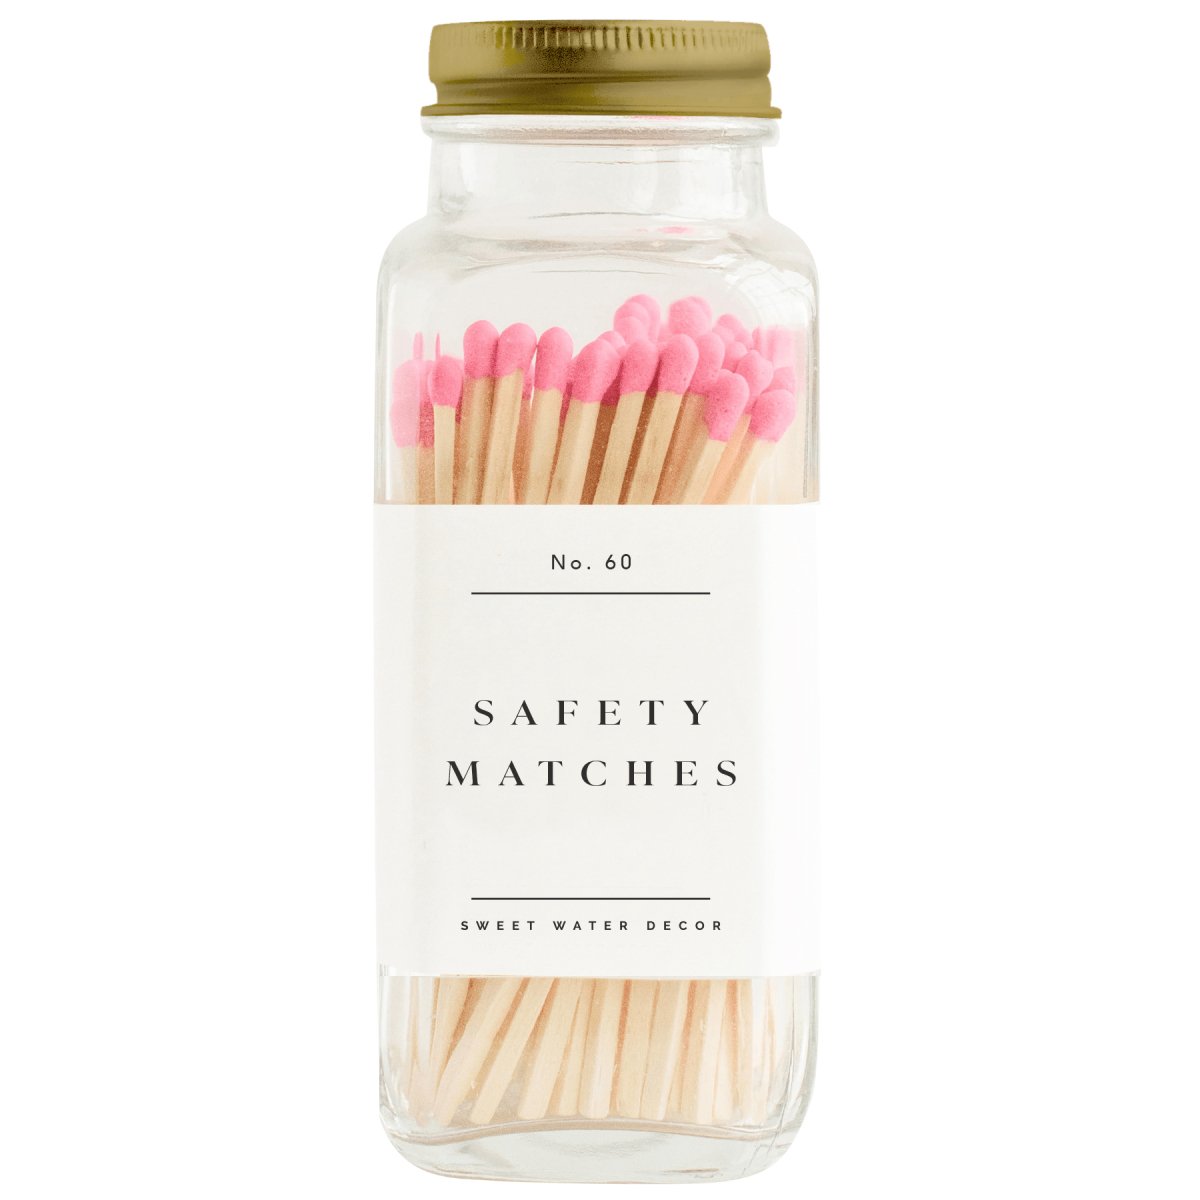 Sweet Water Decor Safety Matches, Blush Pink - 60 Count, 3.75" - lily & onyx